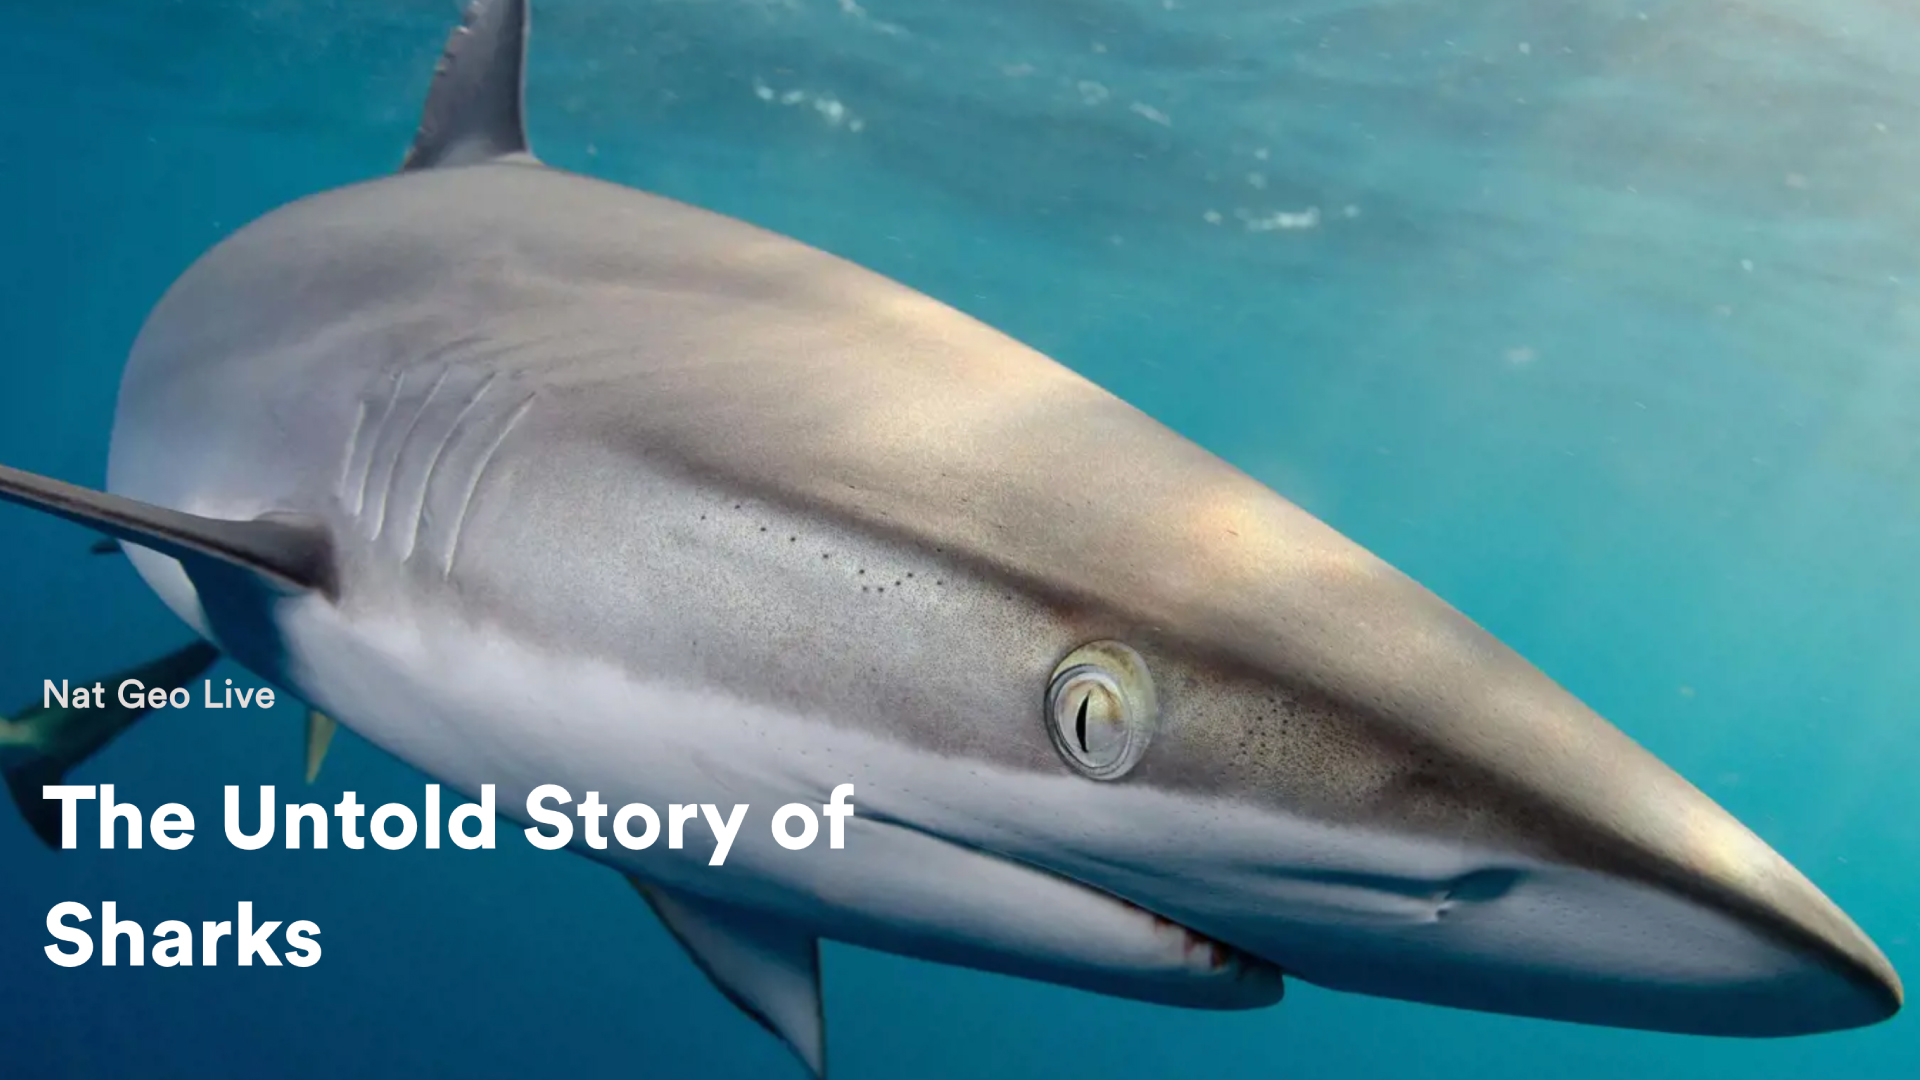 The Untold Story of Sharks